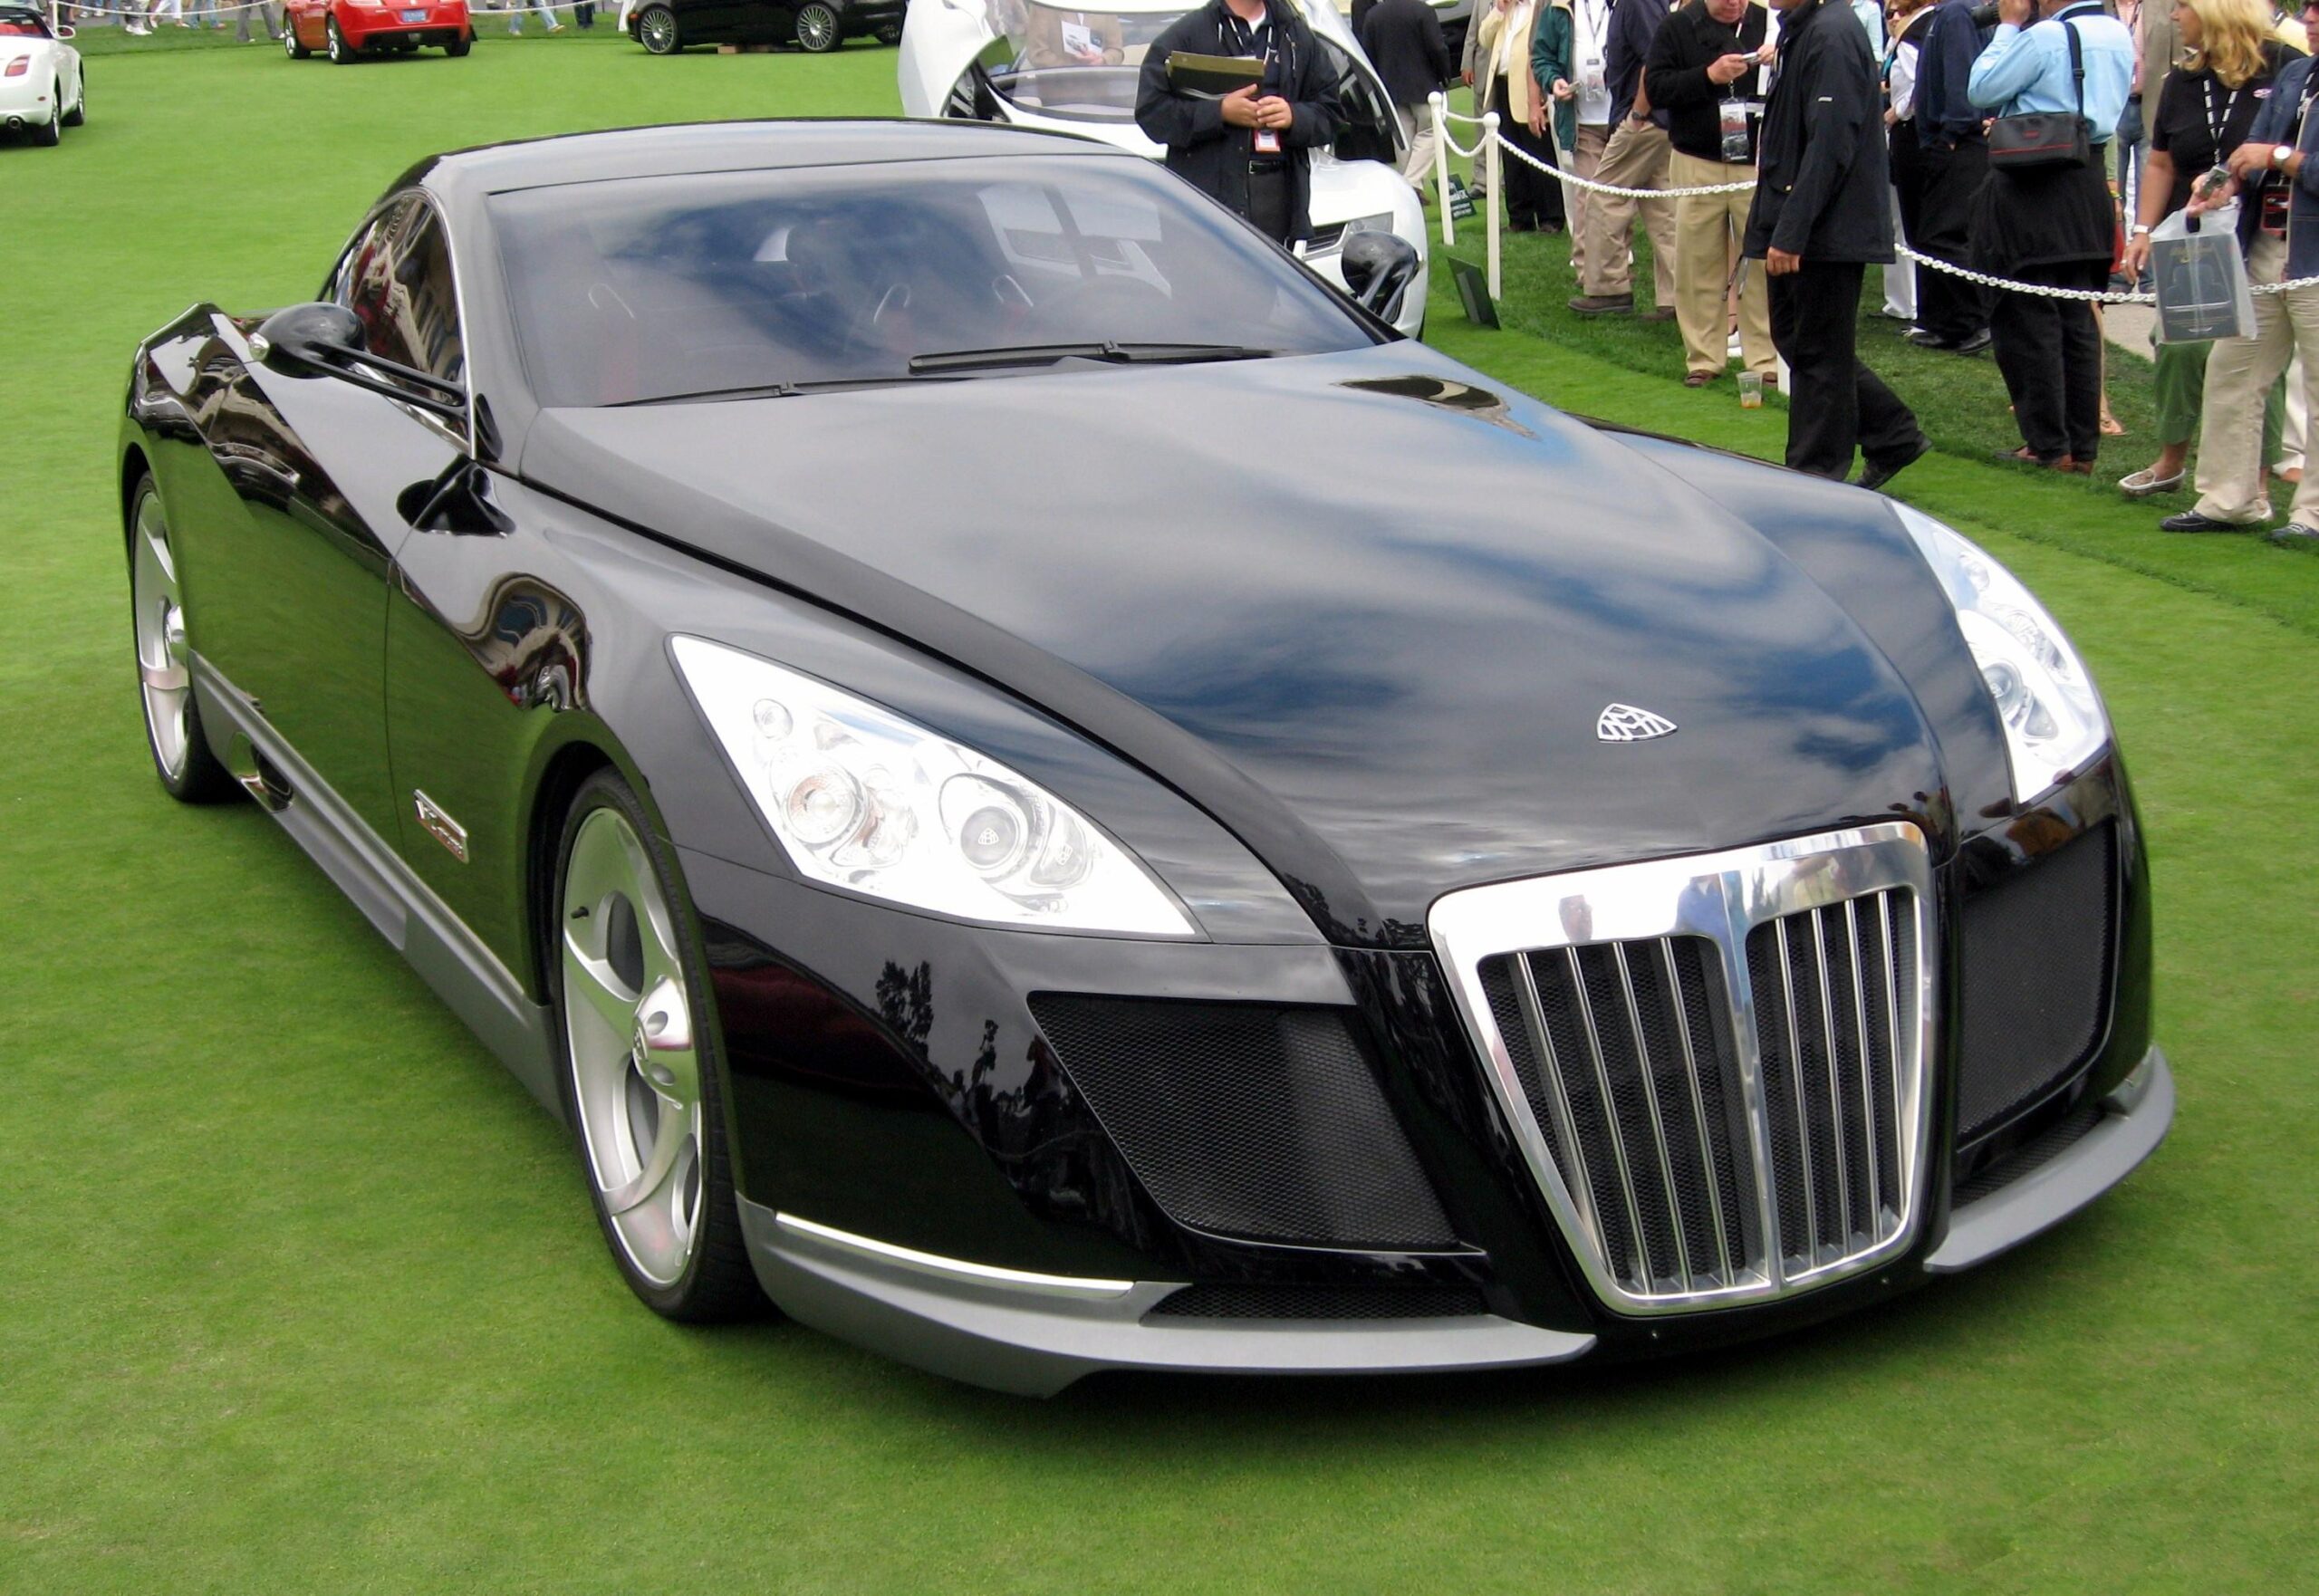 Most expensive cars in the world